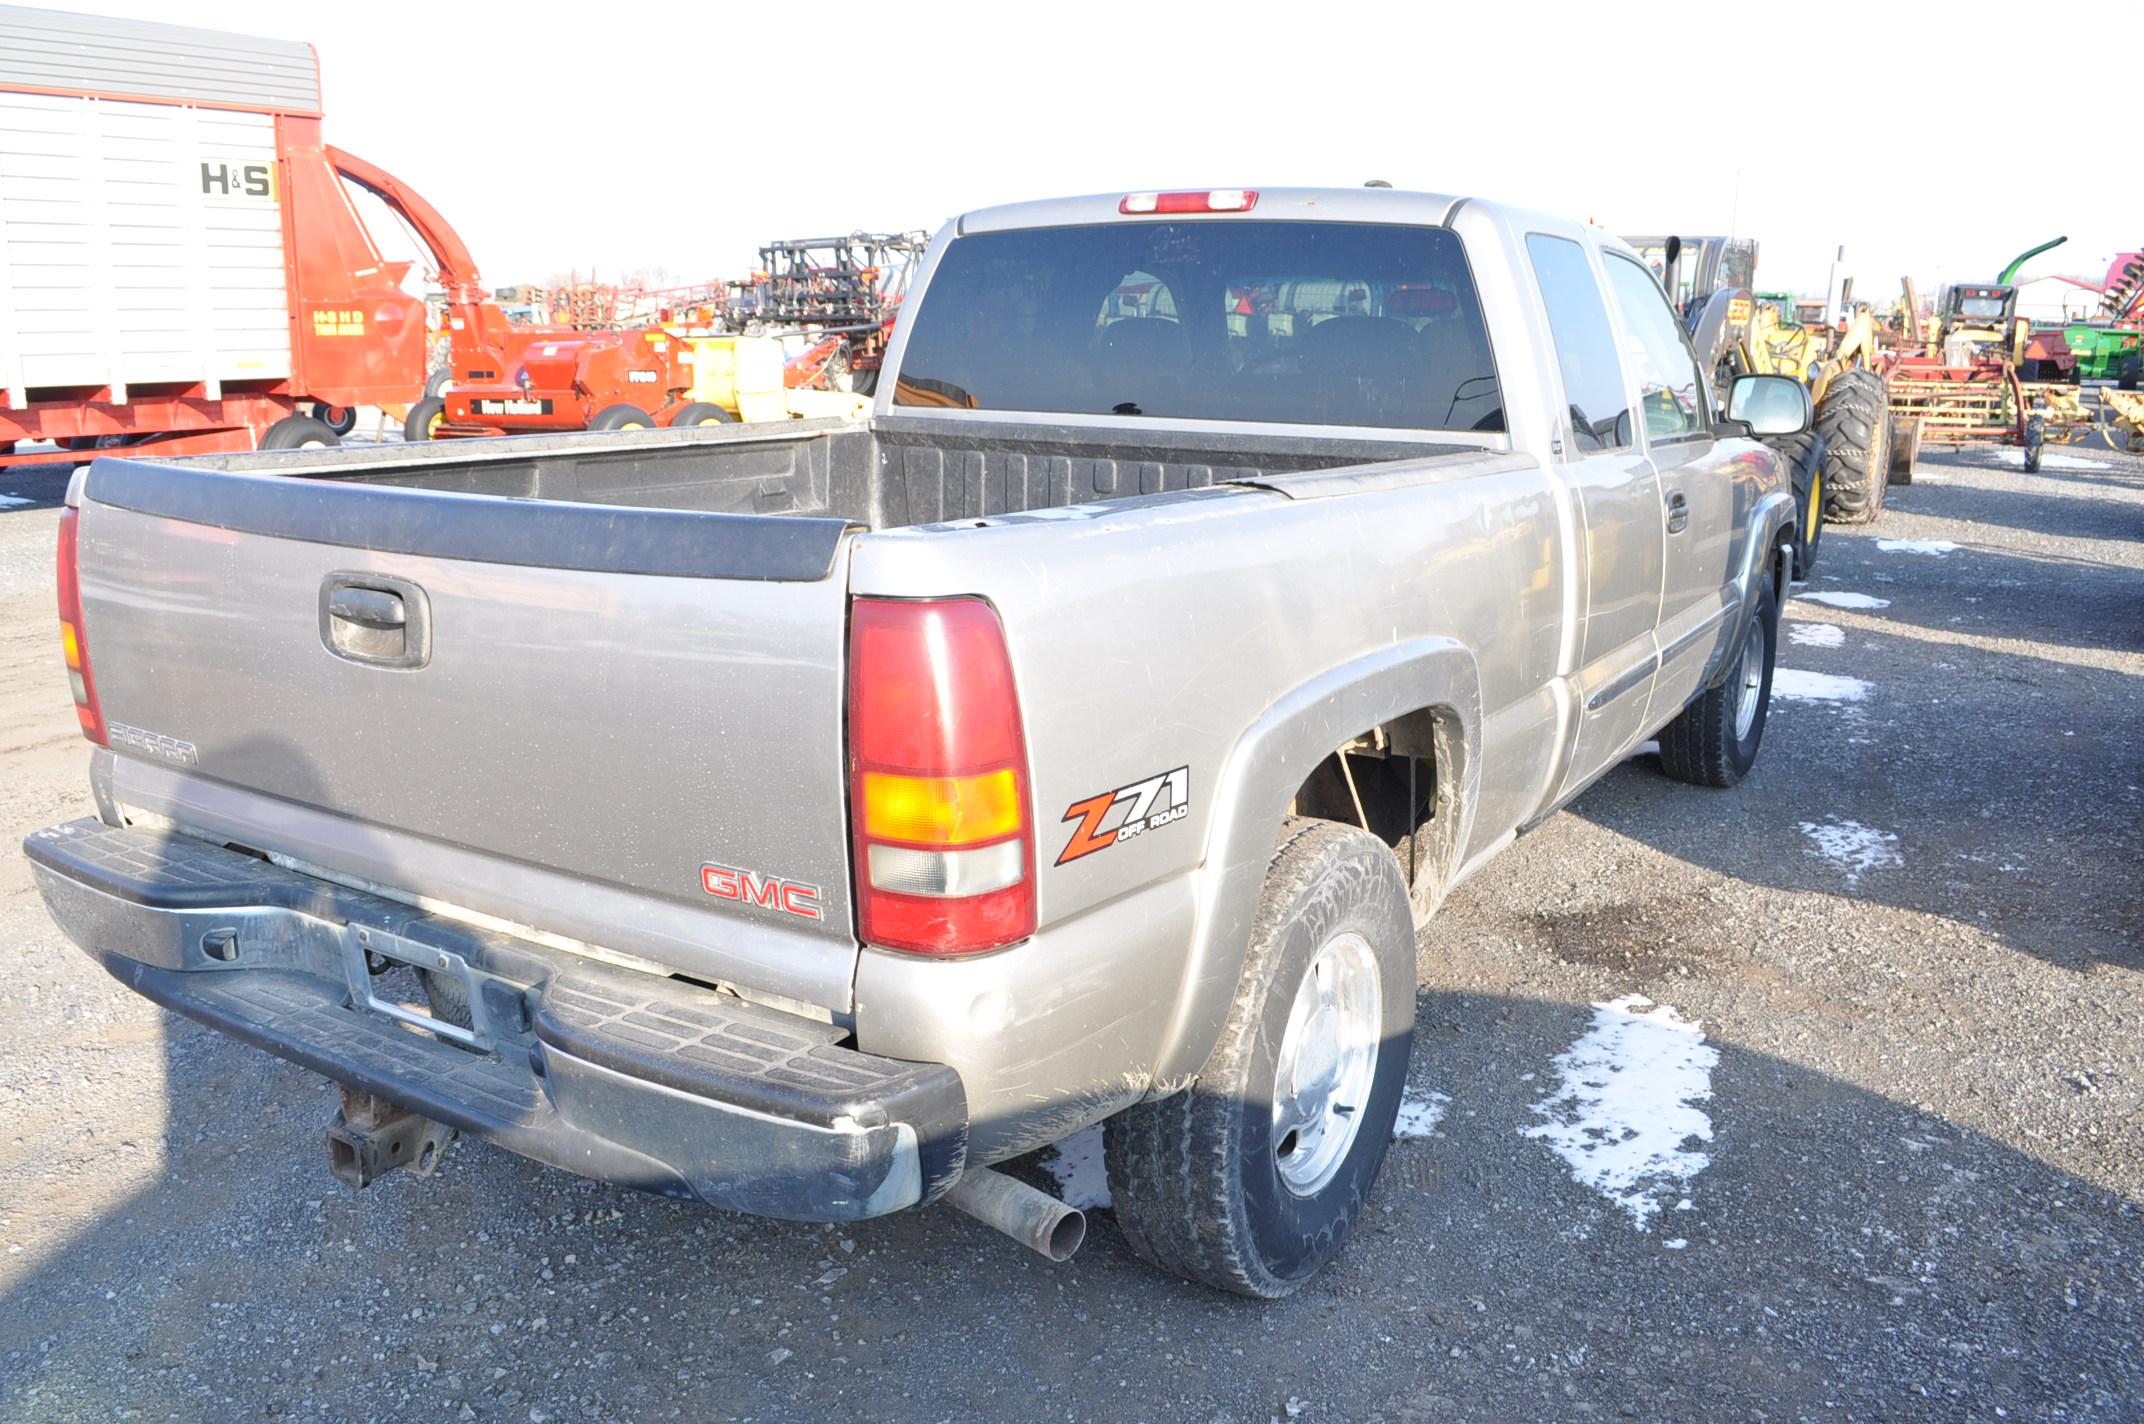 '03 GMC Sierra southern truck w/ ext cab, 4x4, V8 engine, automatic trans, loaded, unknown mi, VIN#